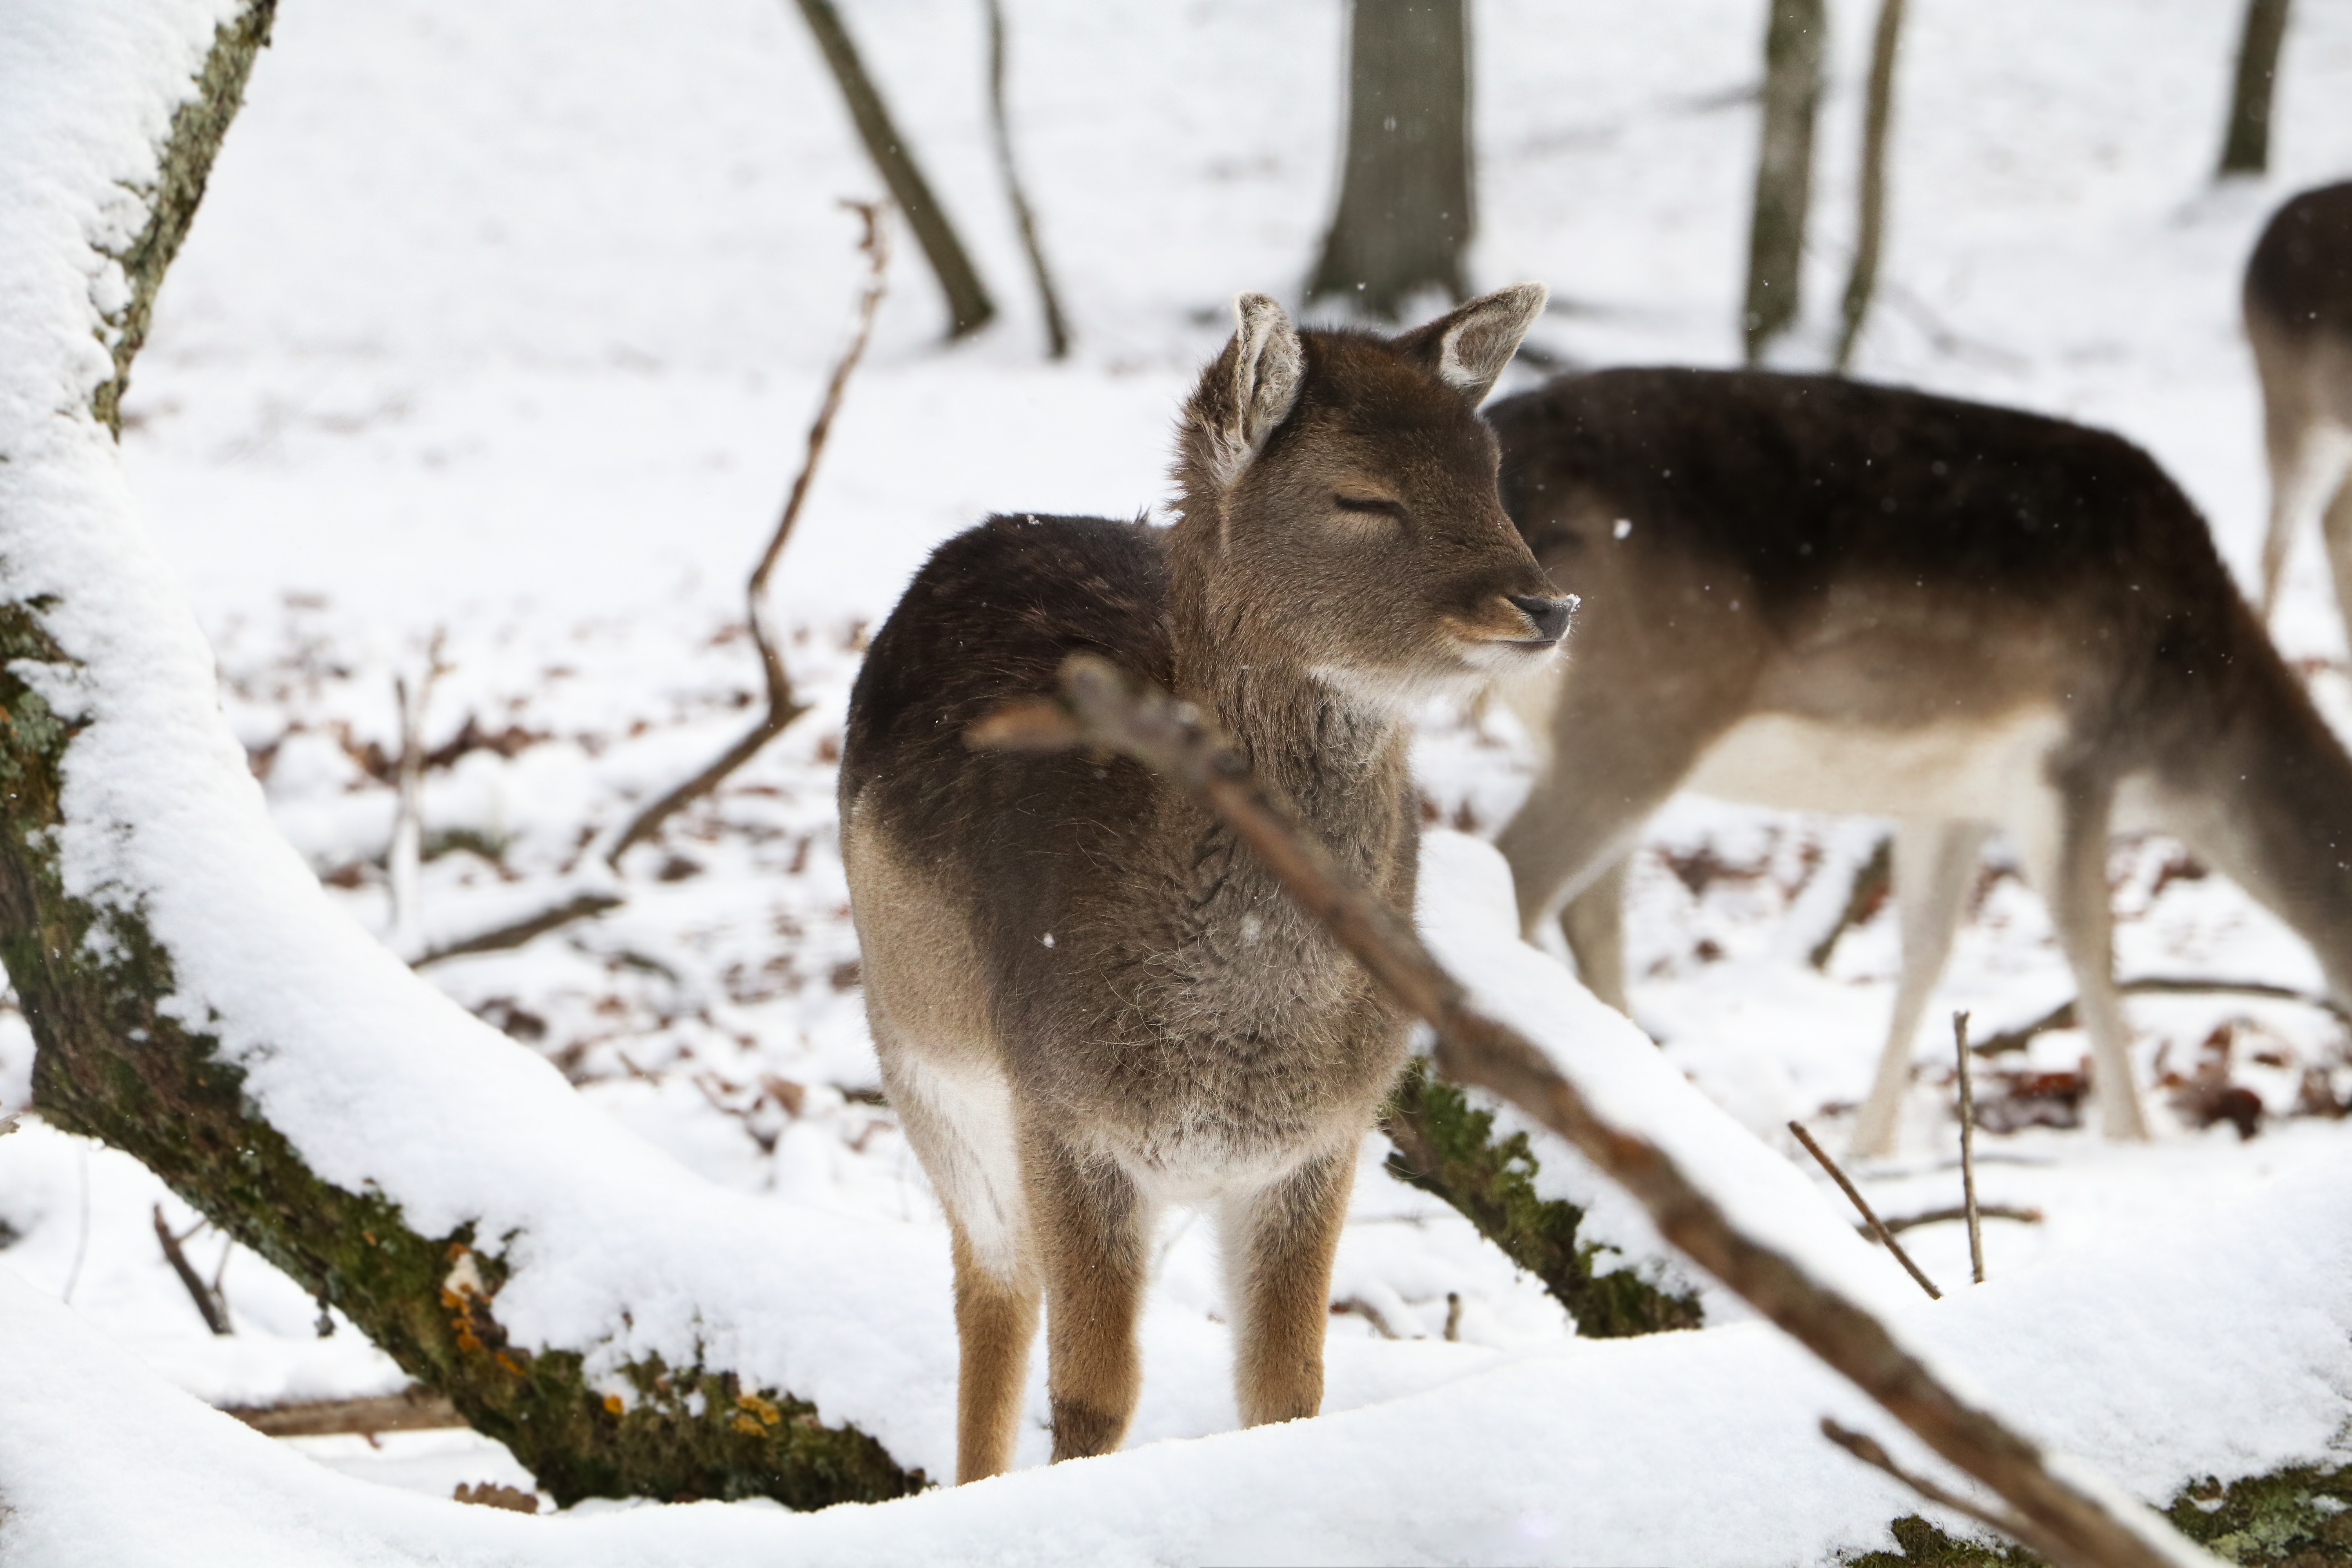 Erecting Barriers Around Trees Can Help Prevent Damage From Deer During the Winter